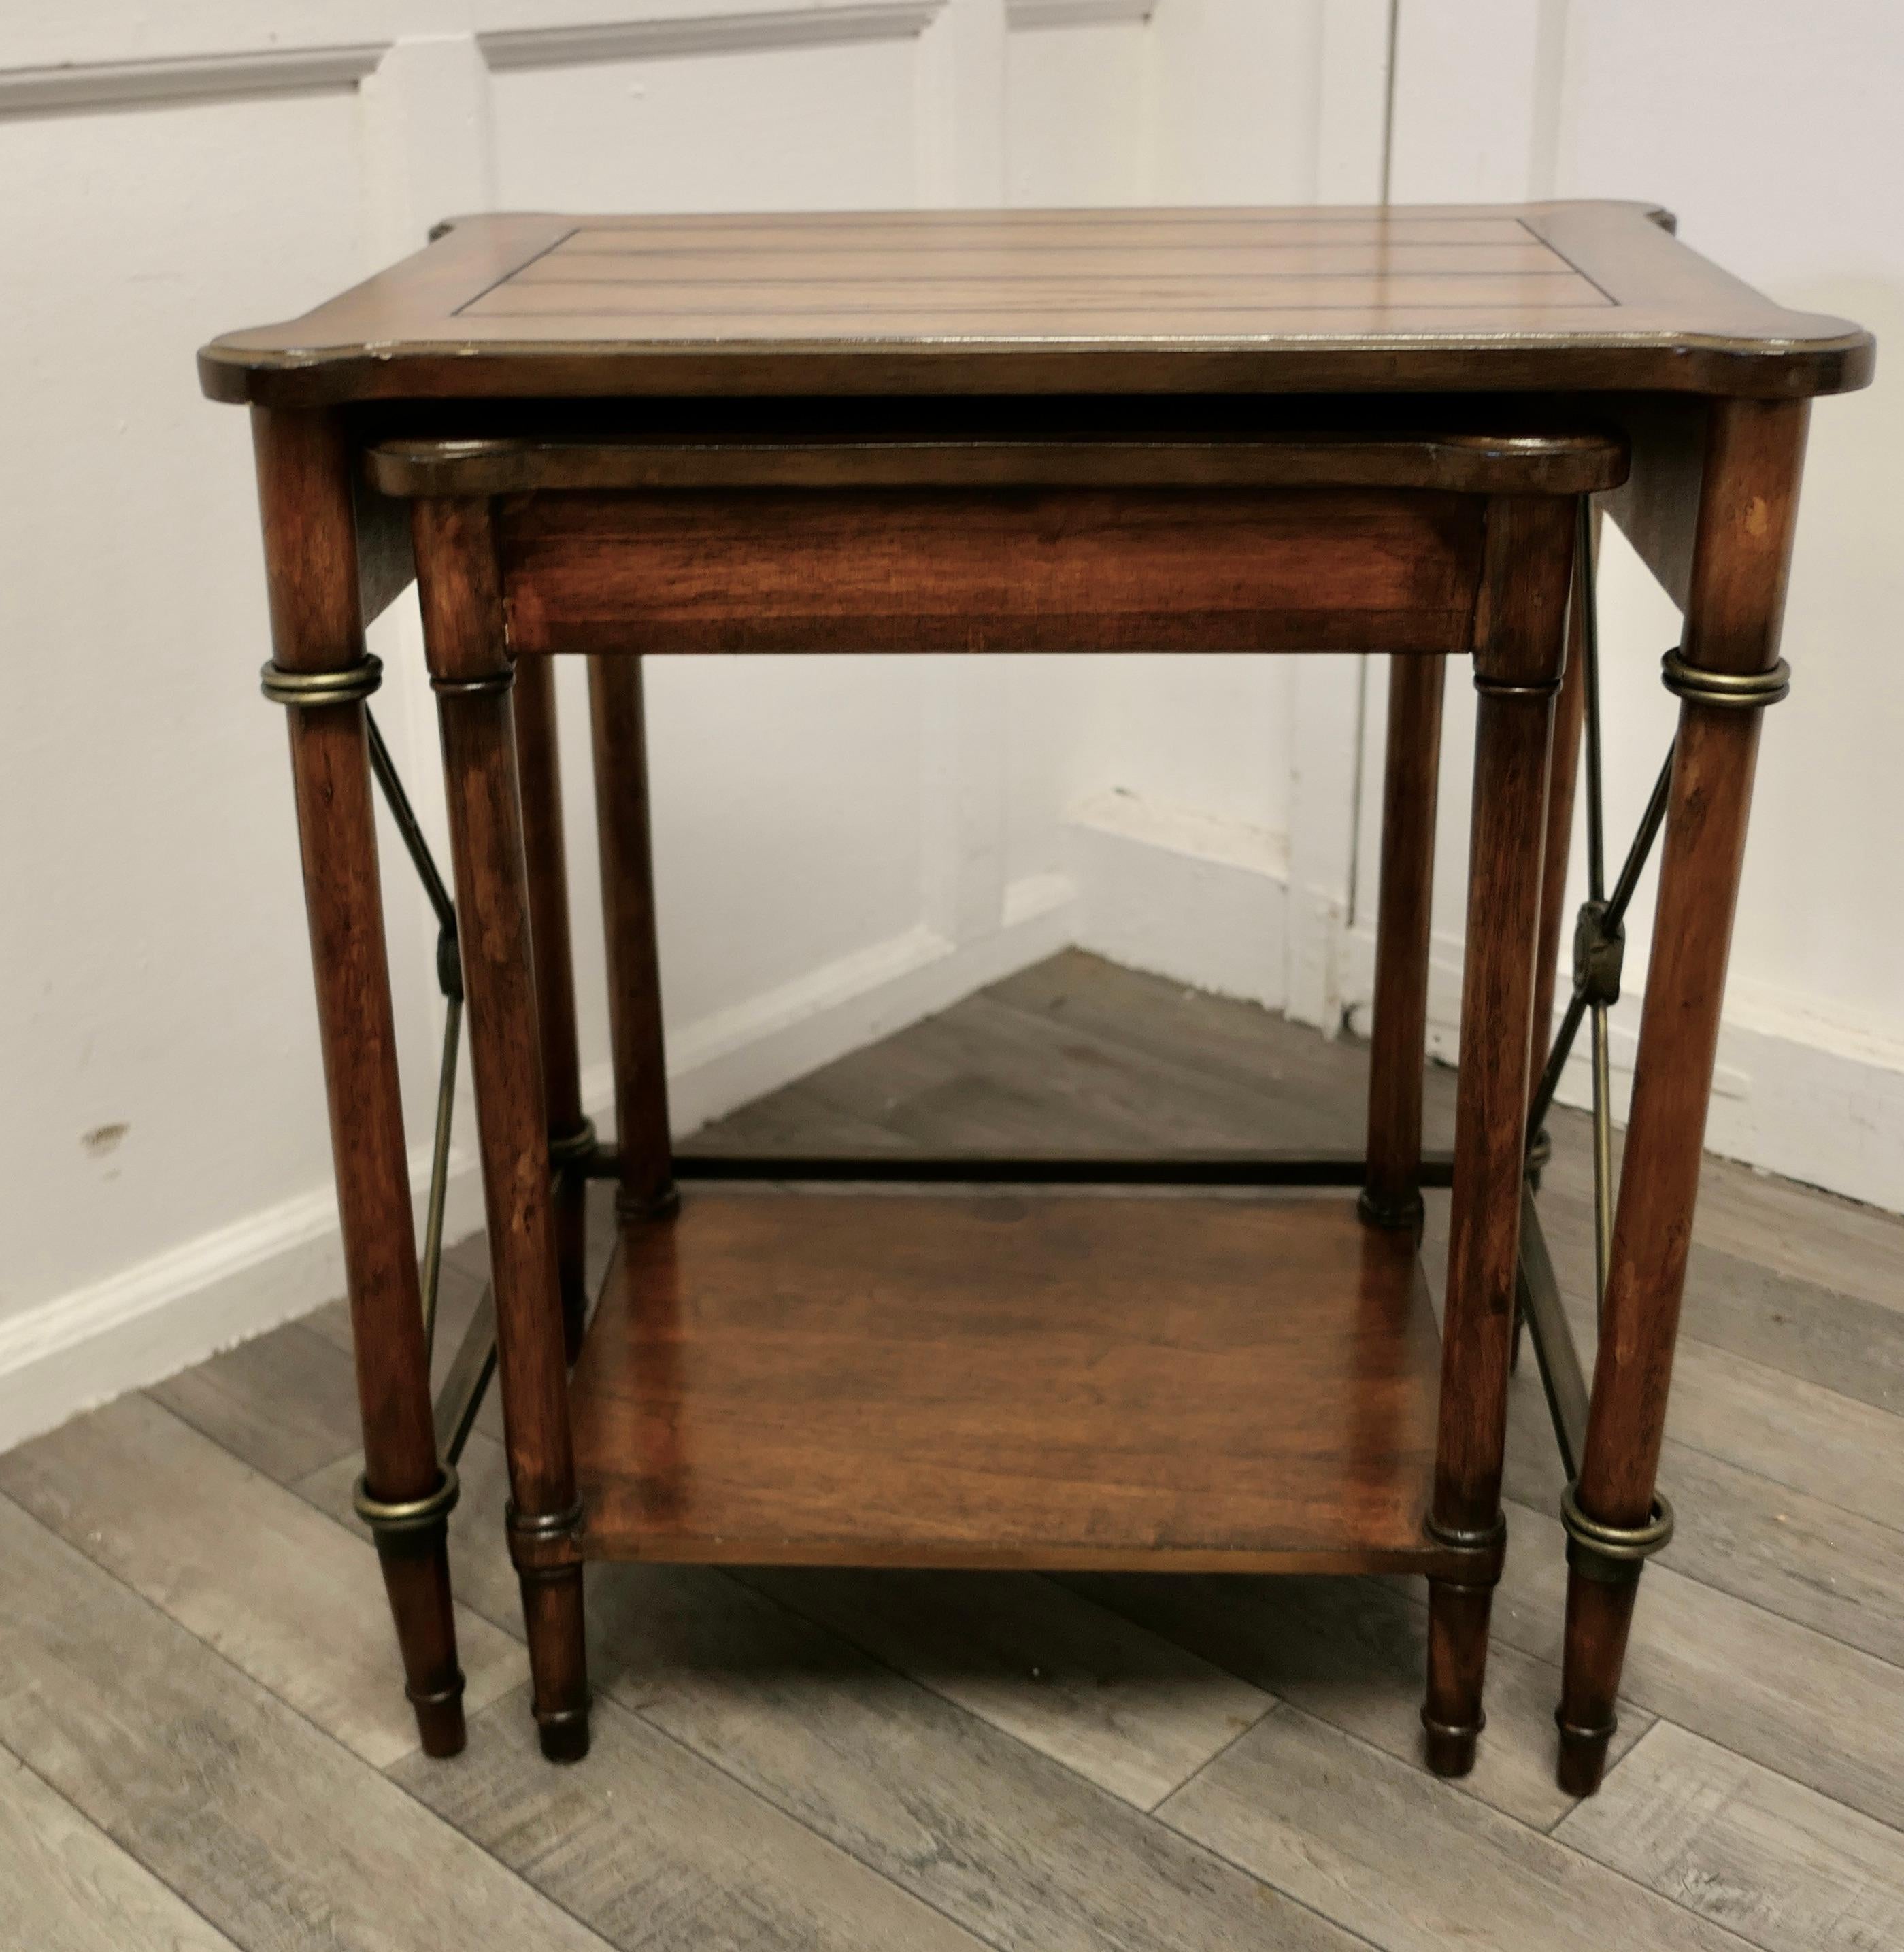 Nest of 2 Regency style walnut and brass occasional tables

A very attractive pair of occasional tables with a regency look, the smaller of the 2 fits under the larger table, like a nest of tables, they are in good used condition 
The larger